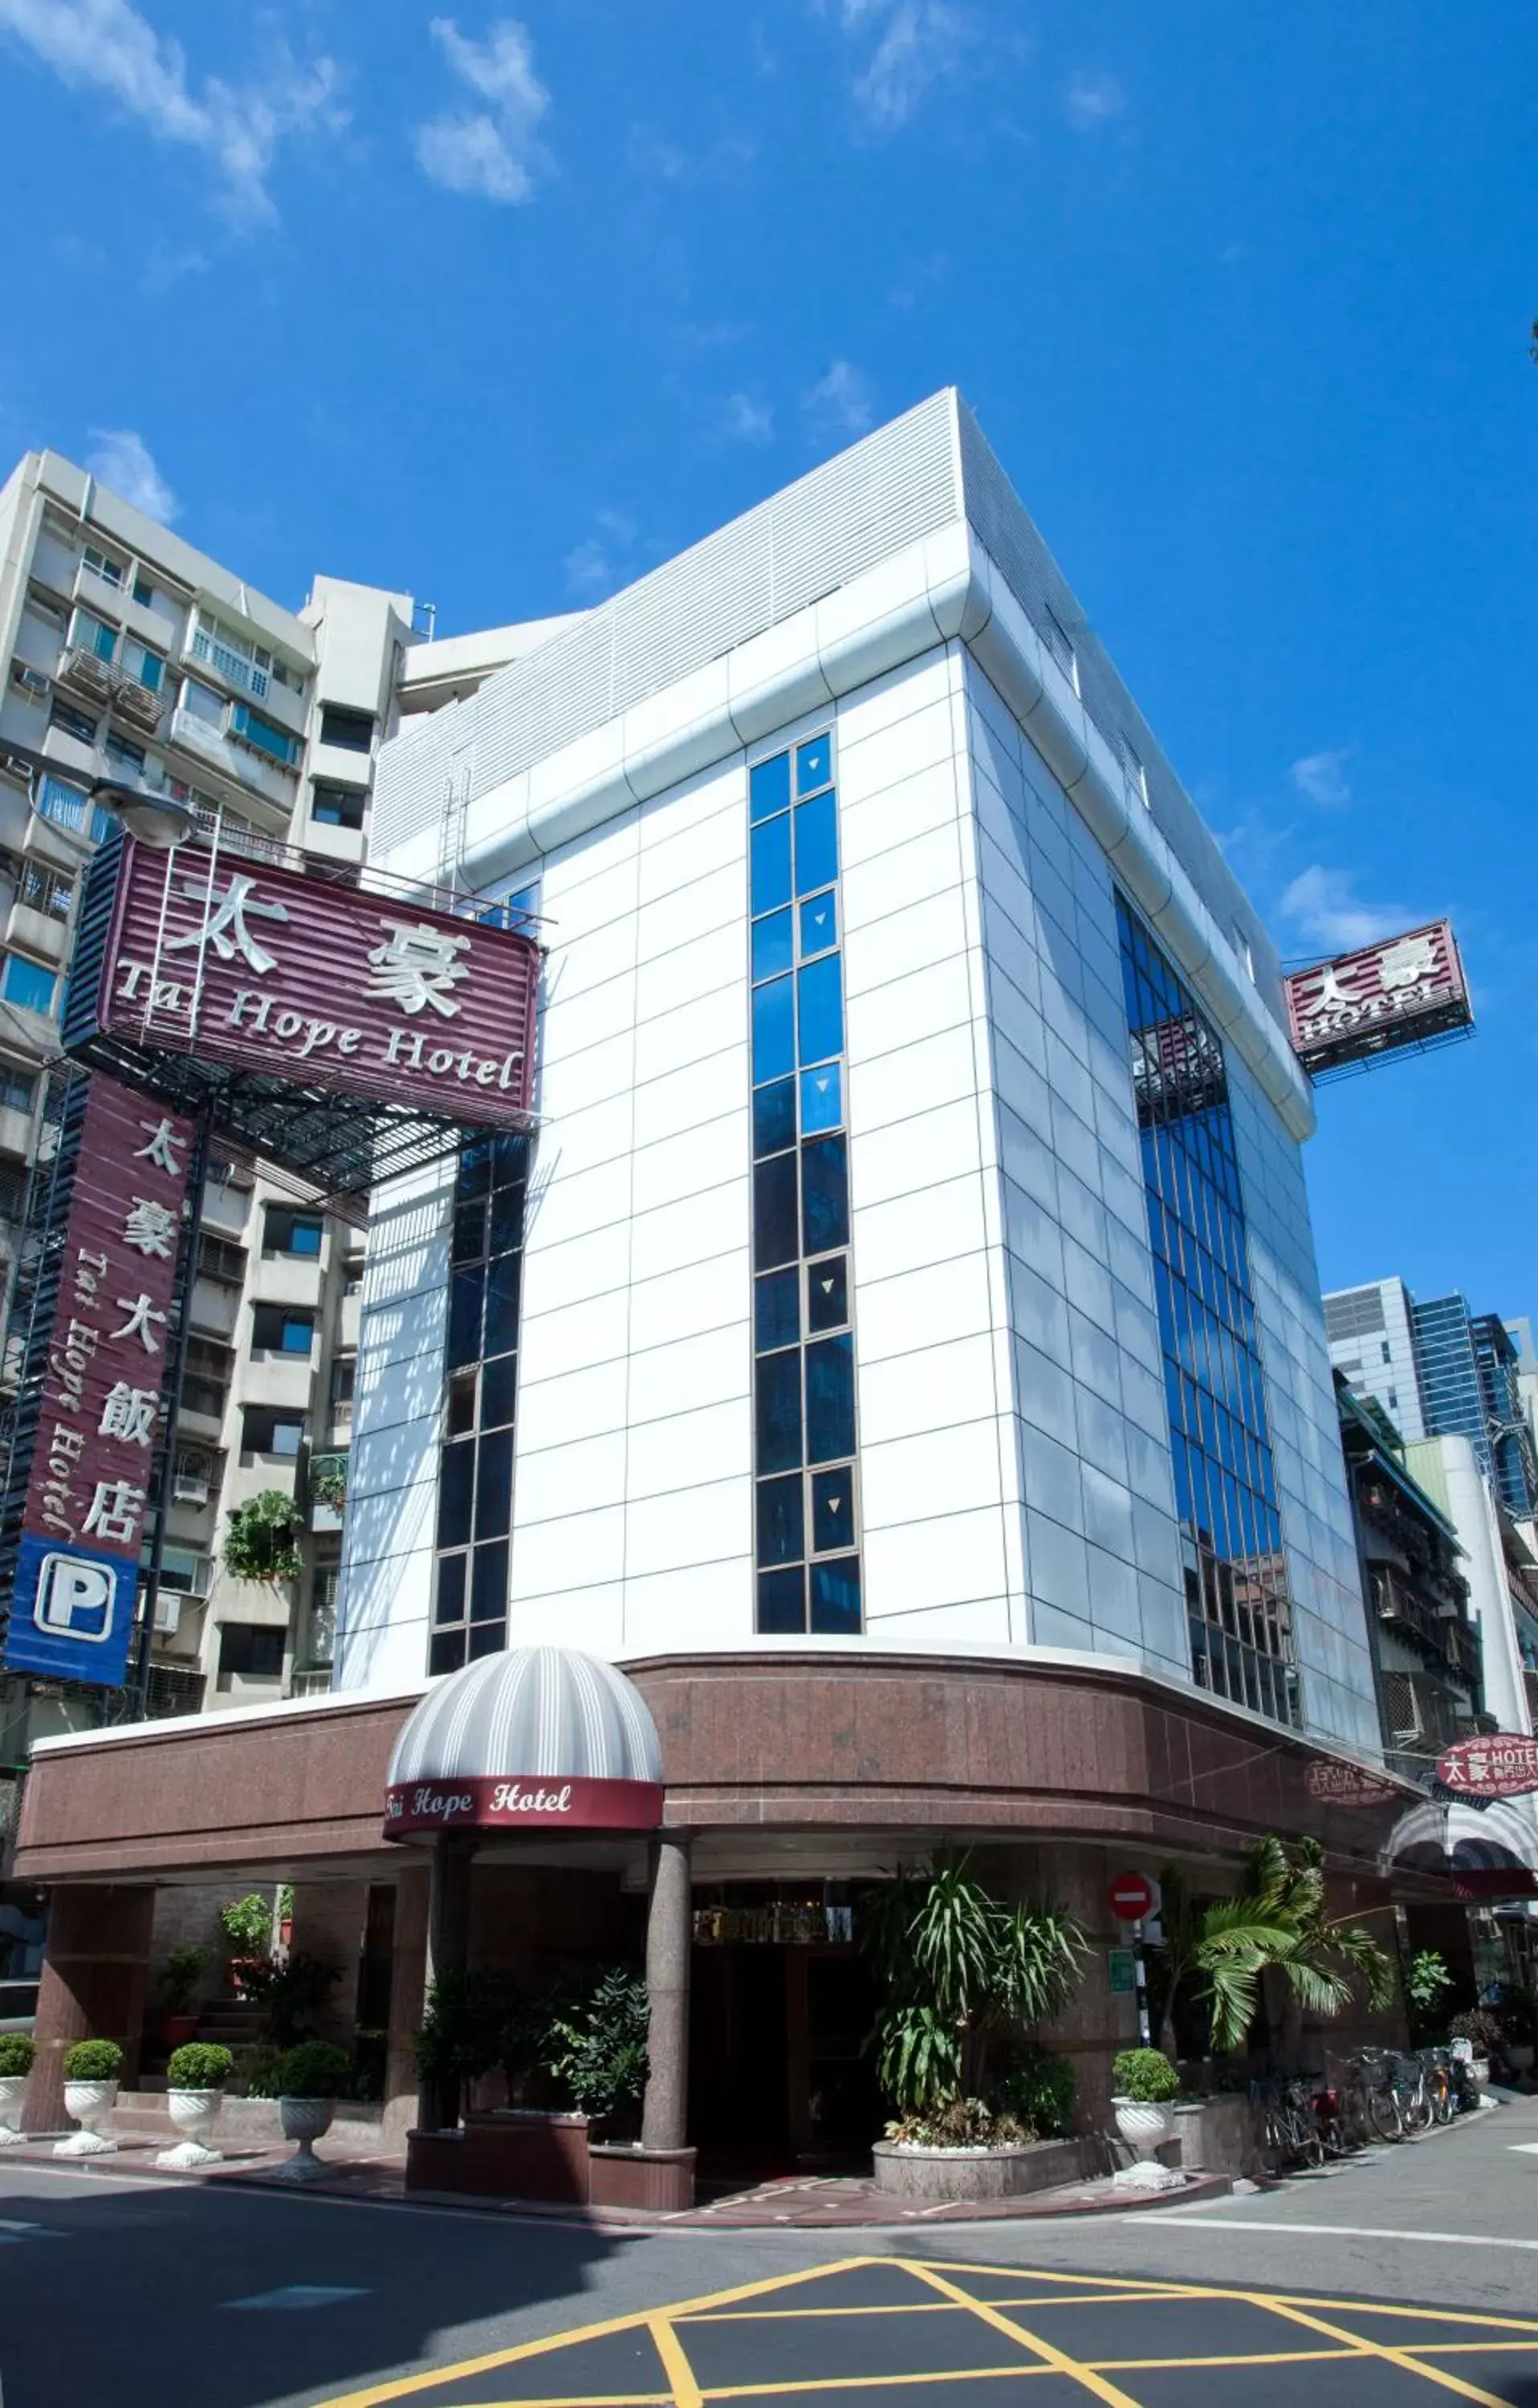 Property Building in Tai Hope Hotel